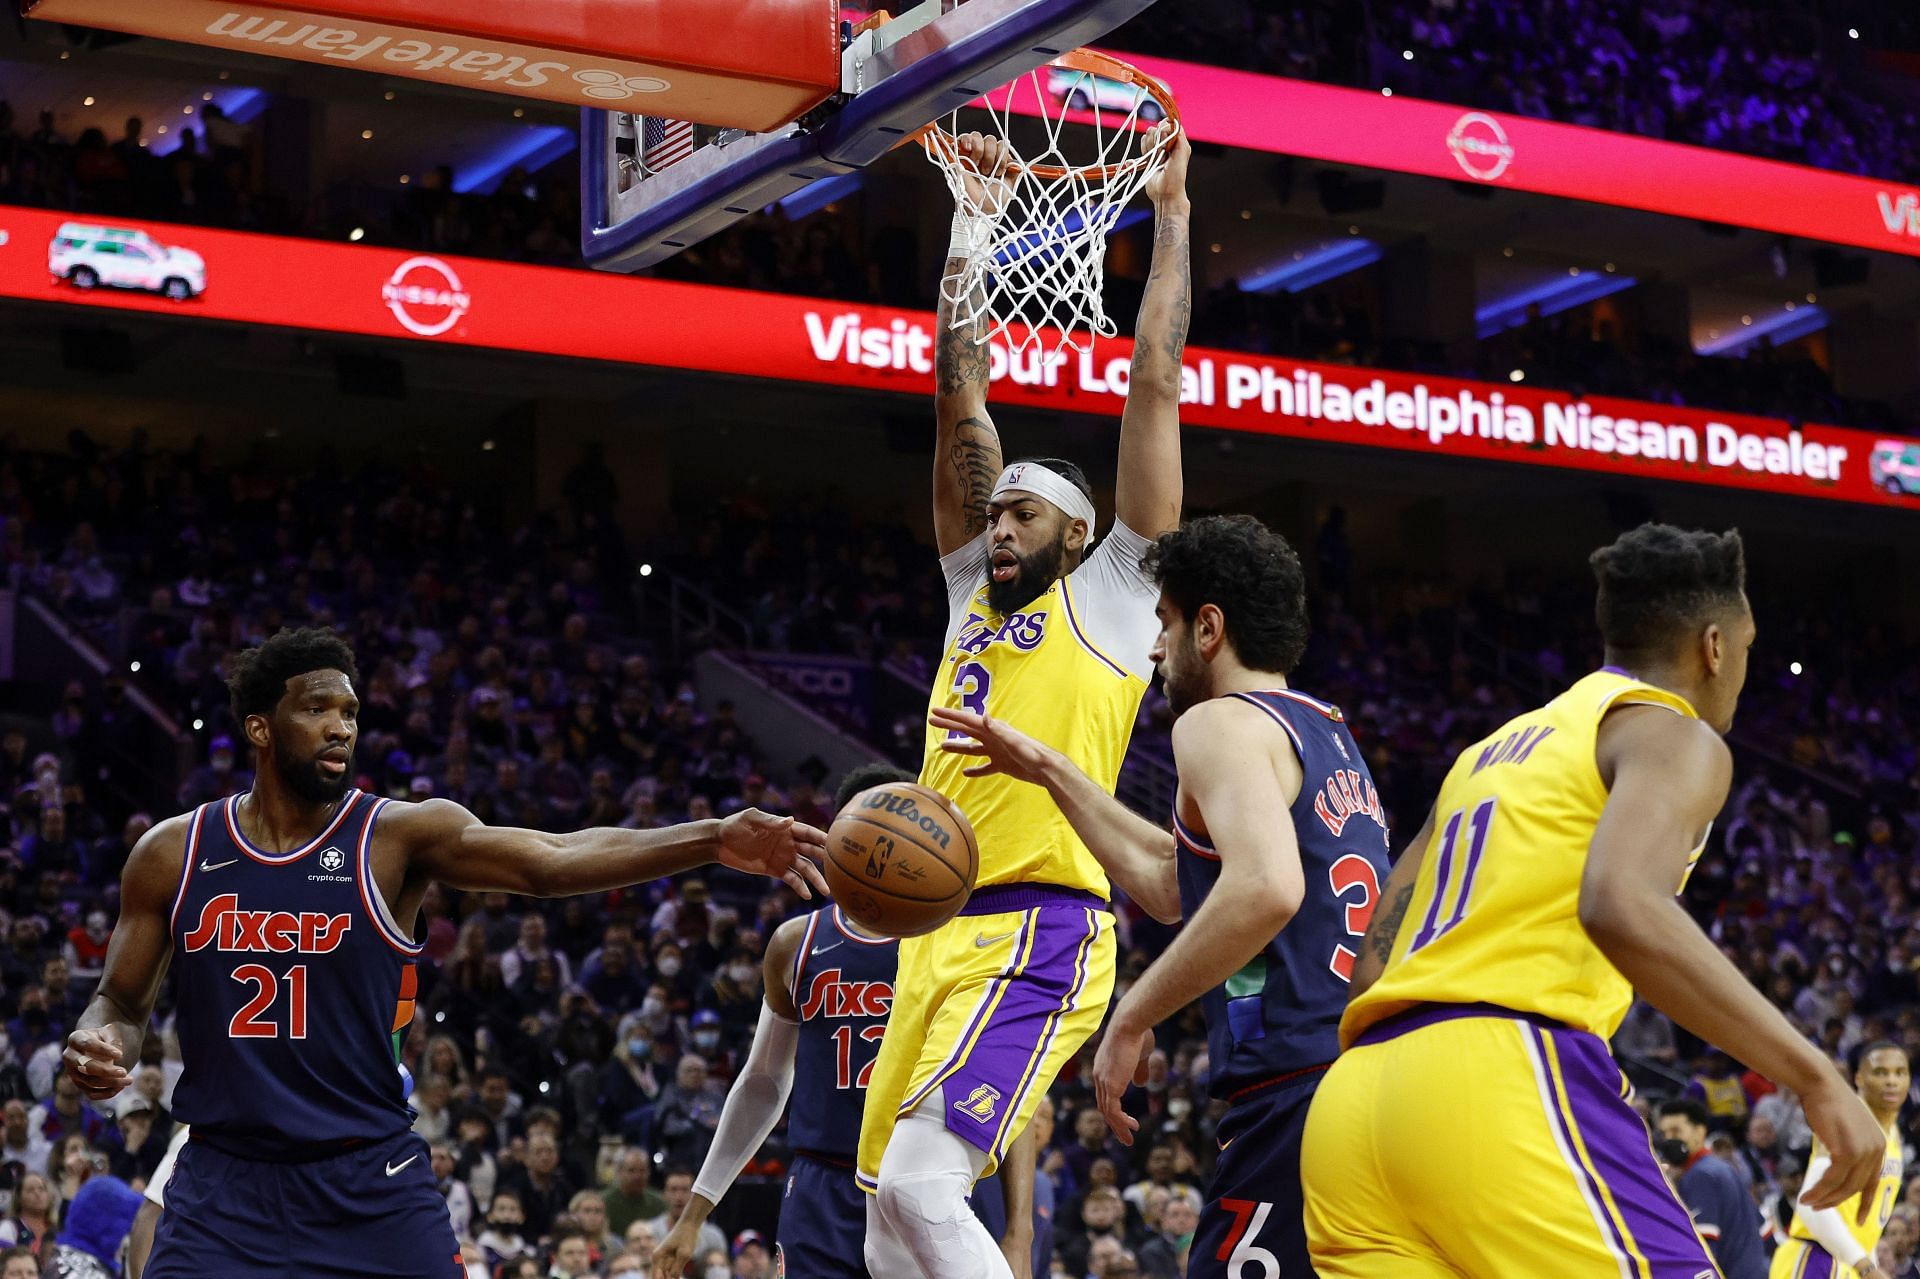 Anthony Davis #3 of the Los Angeles Lakers dunks against the Philadelphia 76ers